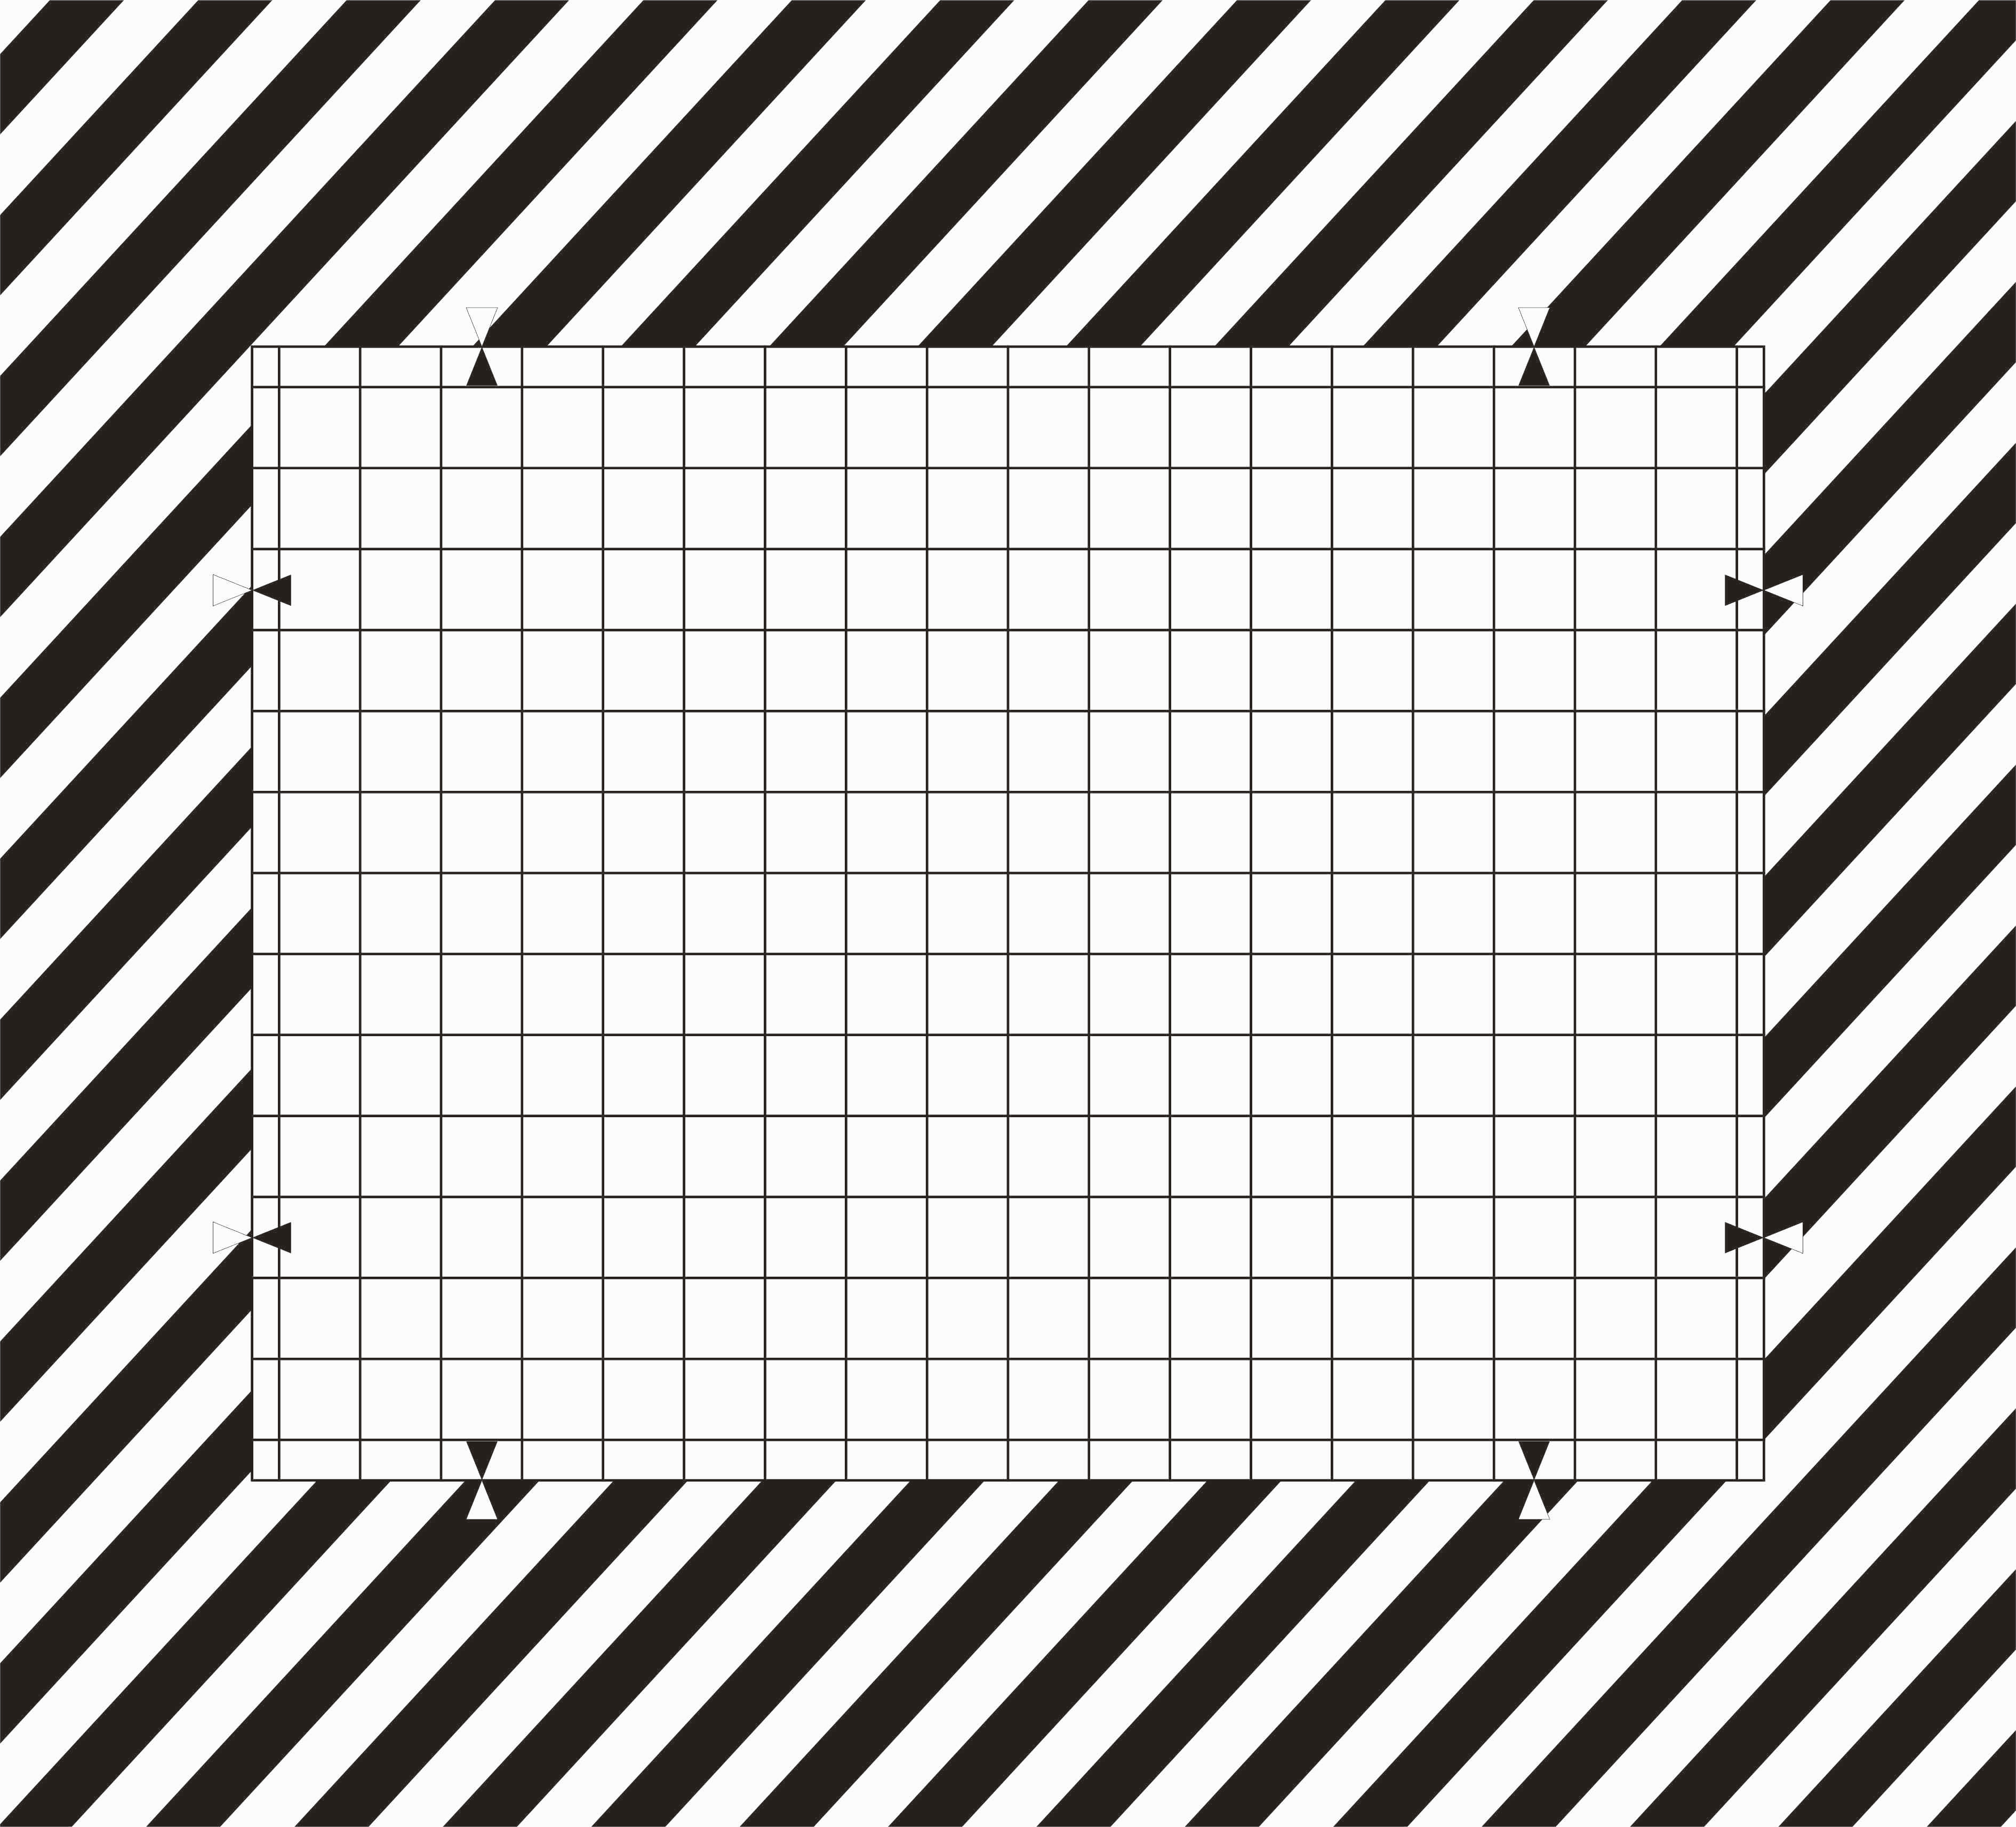 3nh Distortion Grid Test Chart To measure disortion of digital cameras